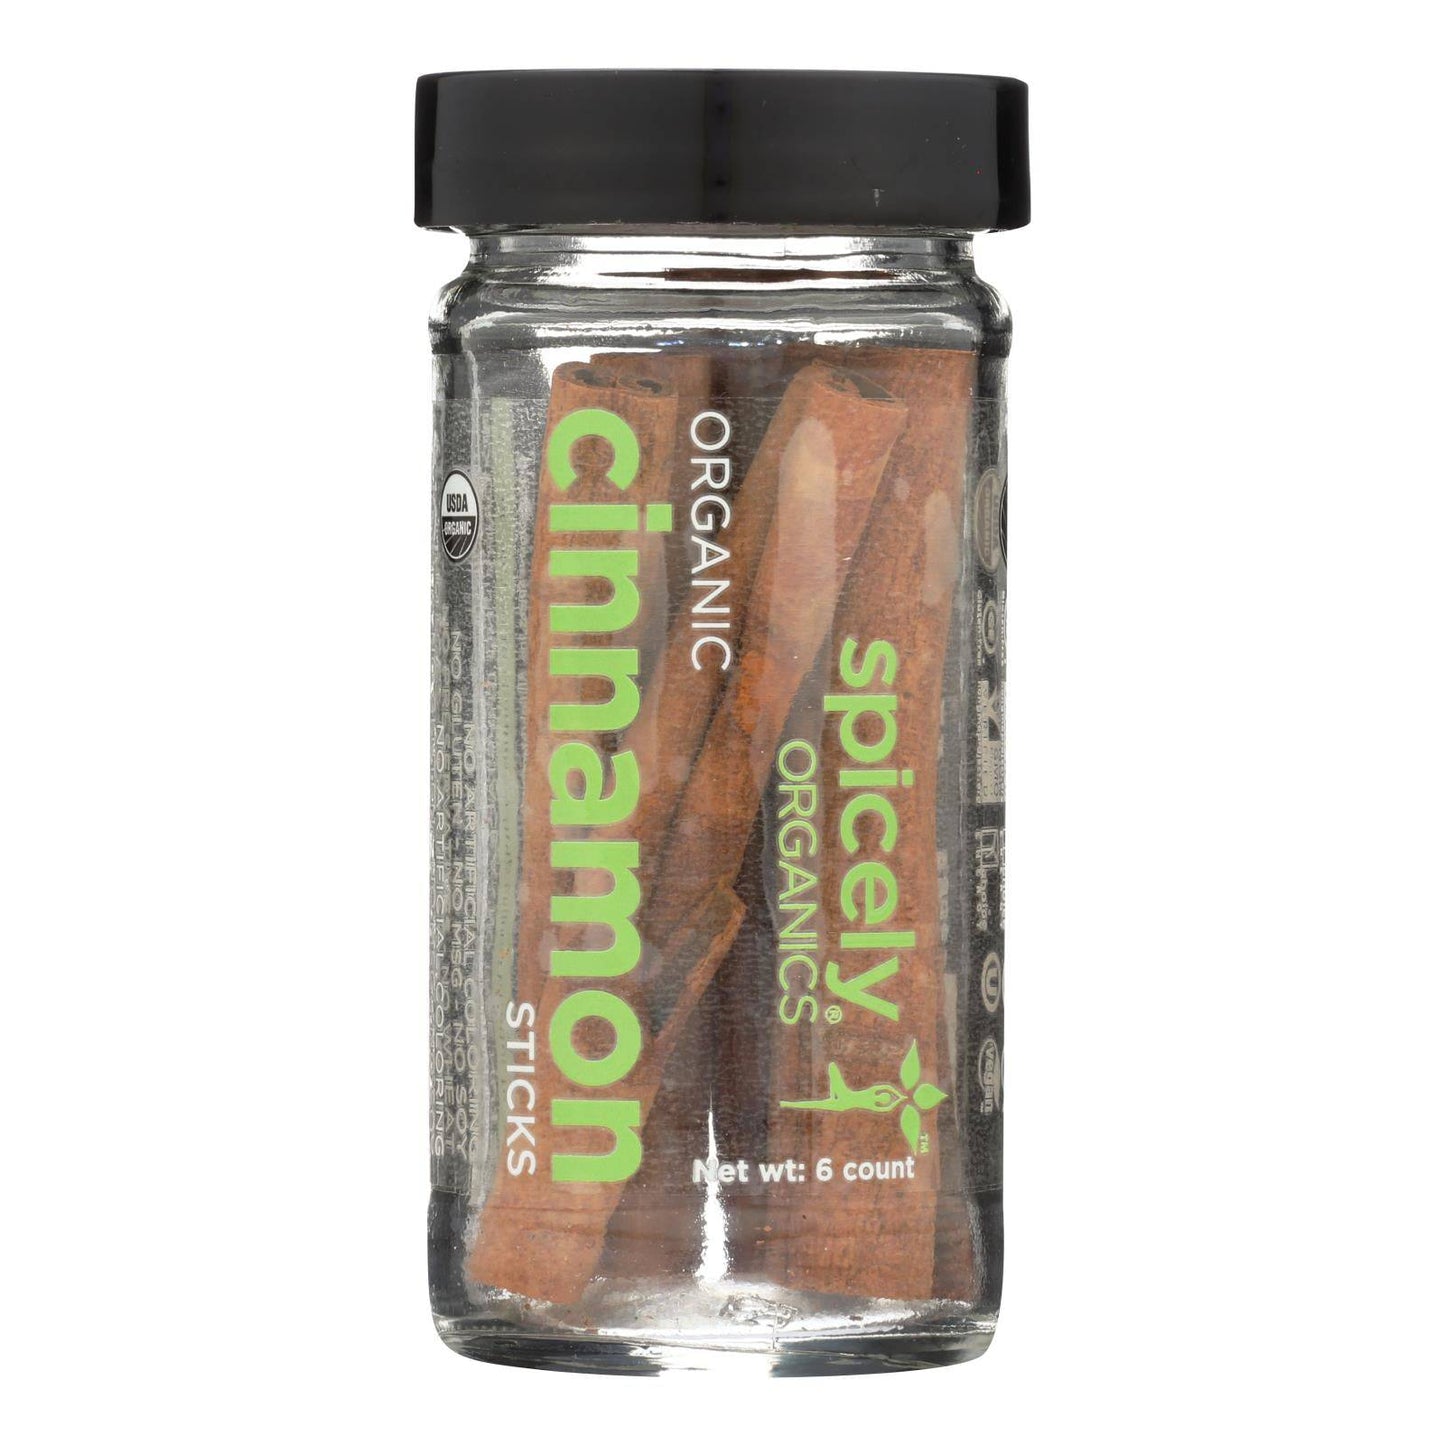 Spicely Organics - Organic Cinnamon - Sticks - Case Of 3 - 6 Count | OnlyNaturals.us